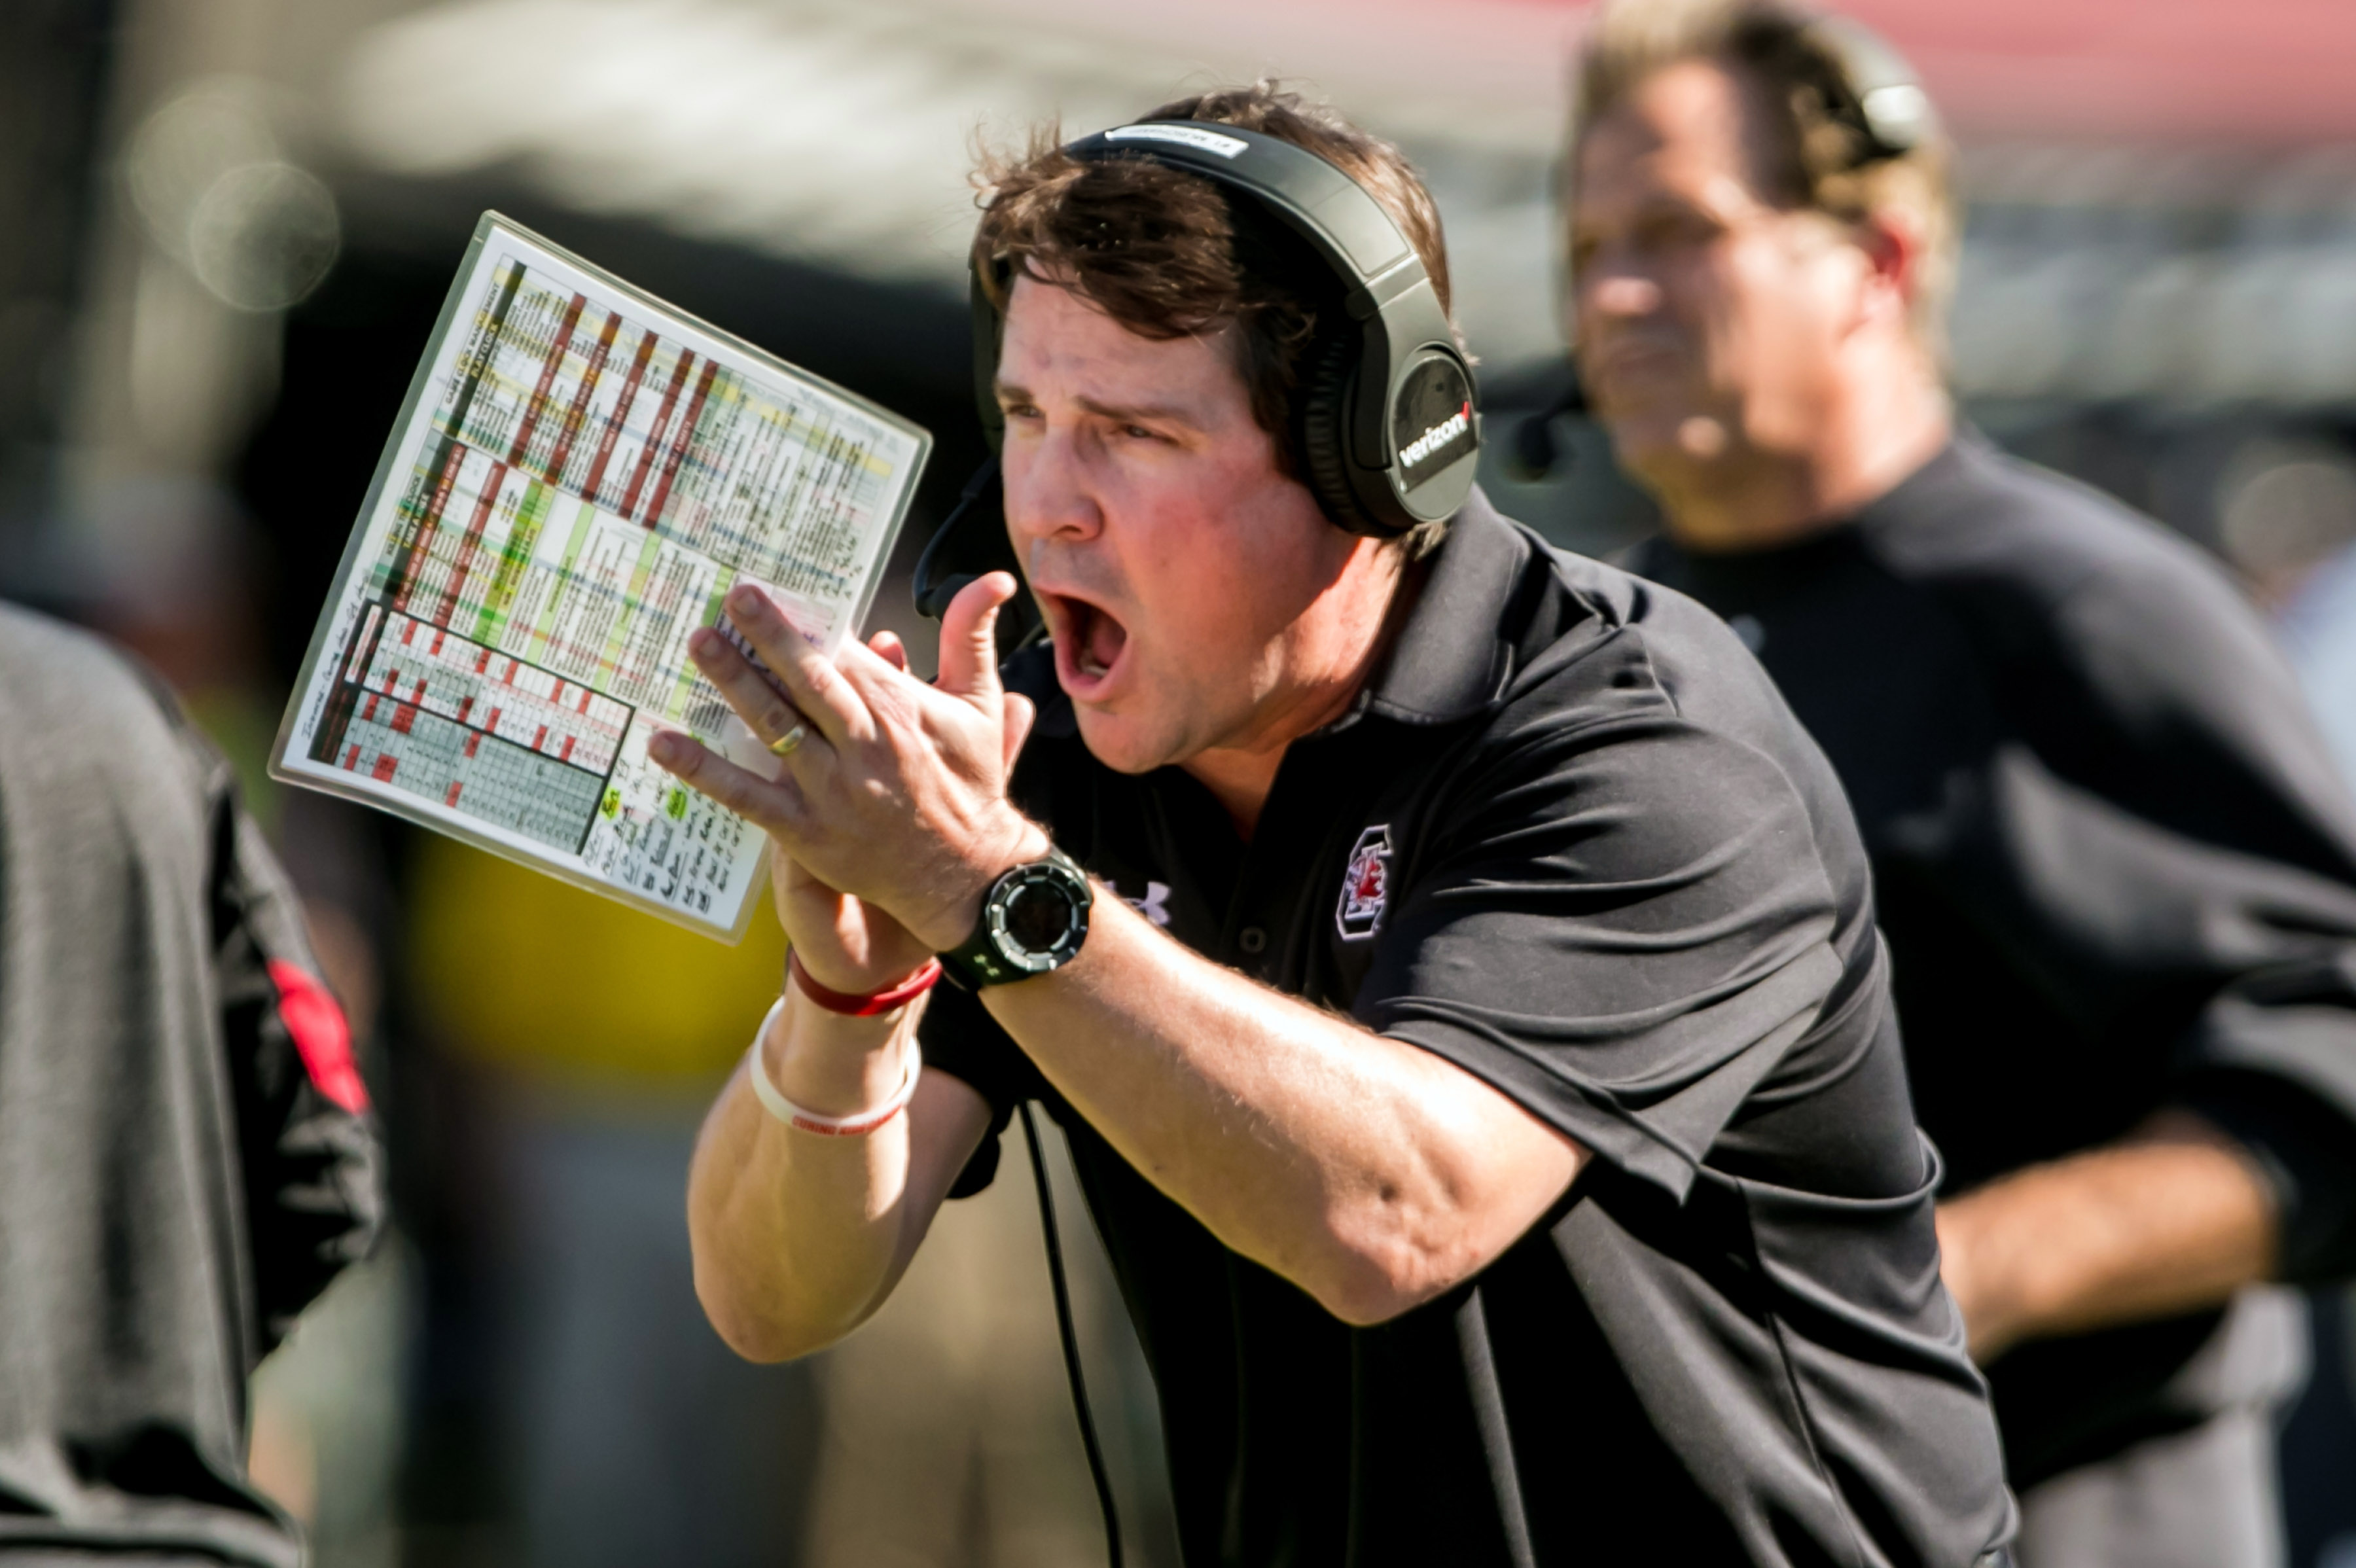 Oct 1, 2016; Columbia, SC, USA; South Carolina Gamecocks head coach Will Muschamp directs his team against the Texas A&M Aggies at Williams-Brice Stadium. Mandatory Credit: Jeff Blake-USA TODAY Sports